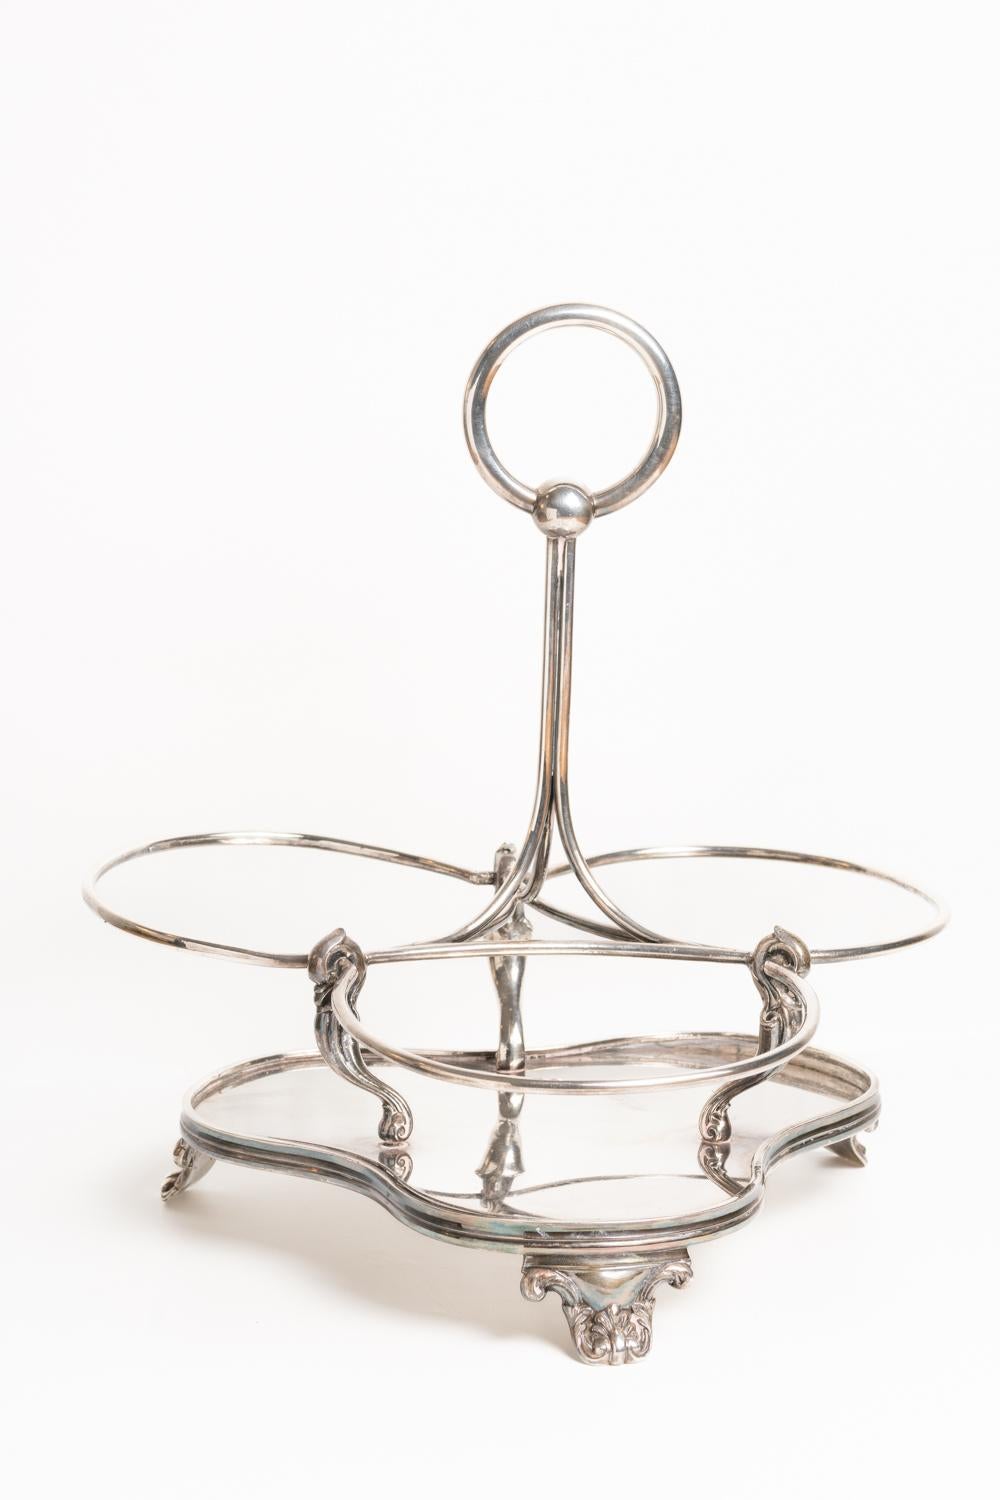 Rare Elkington Victorian Silver Plate Three Bottle Decanter Stand Tantalus, circa 1869. This beautiful and classic silver plated decanter holder has a central stem with a loop handle and the three decanters sit in circular wells each supported with